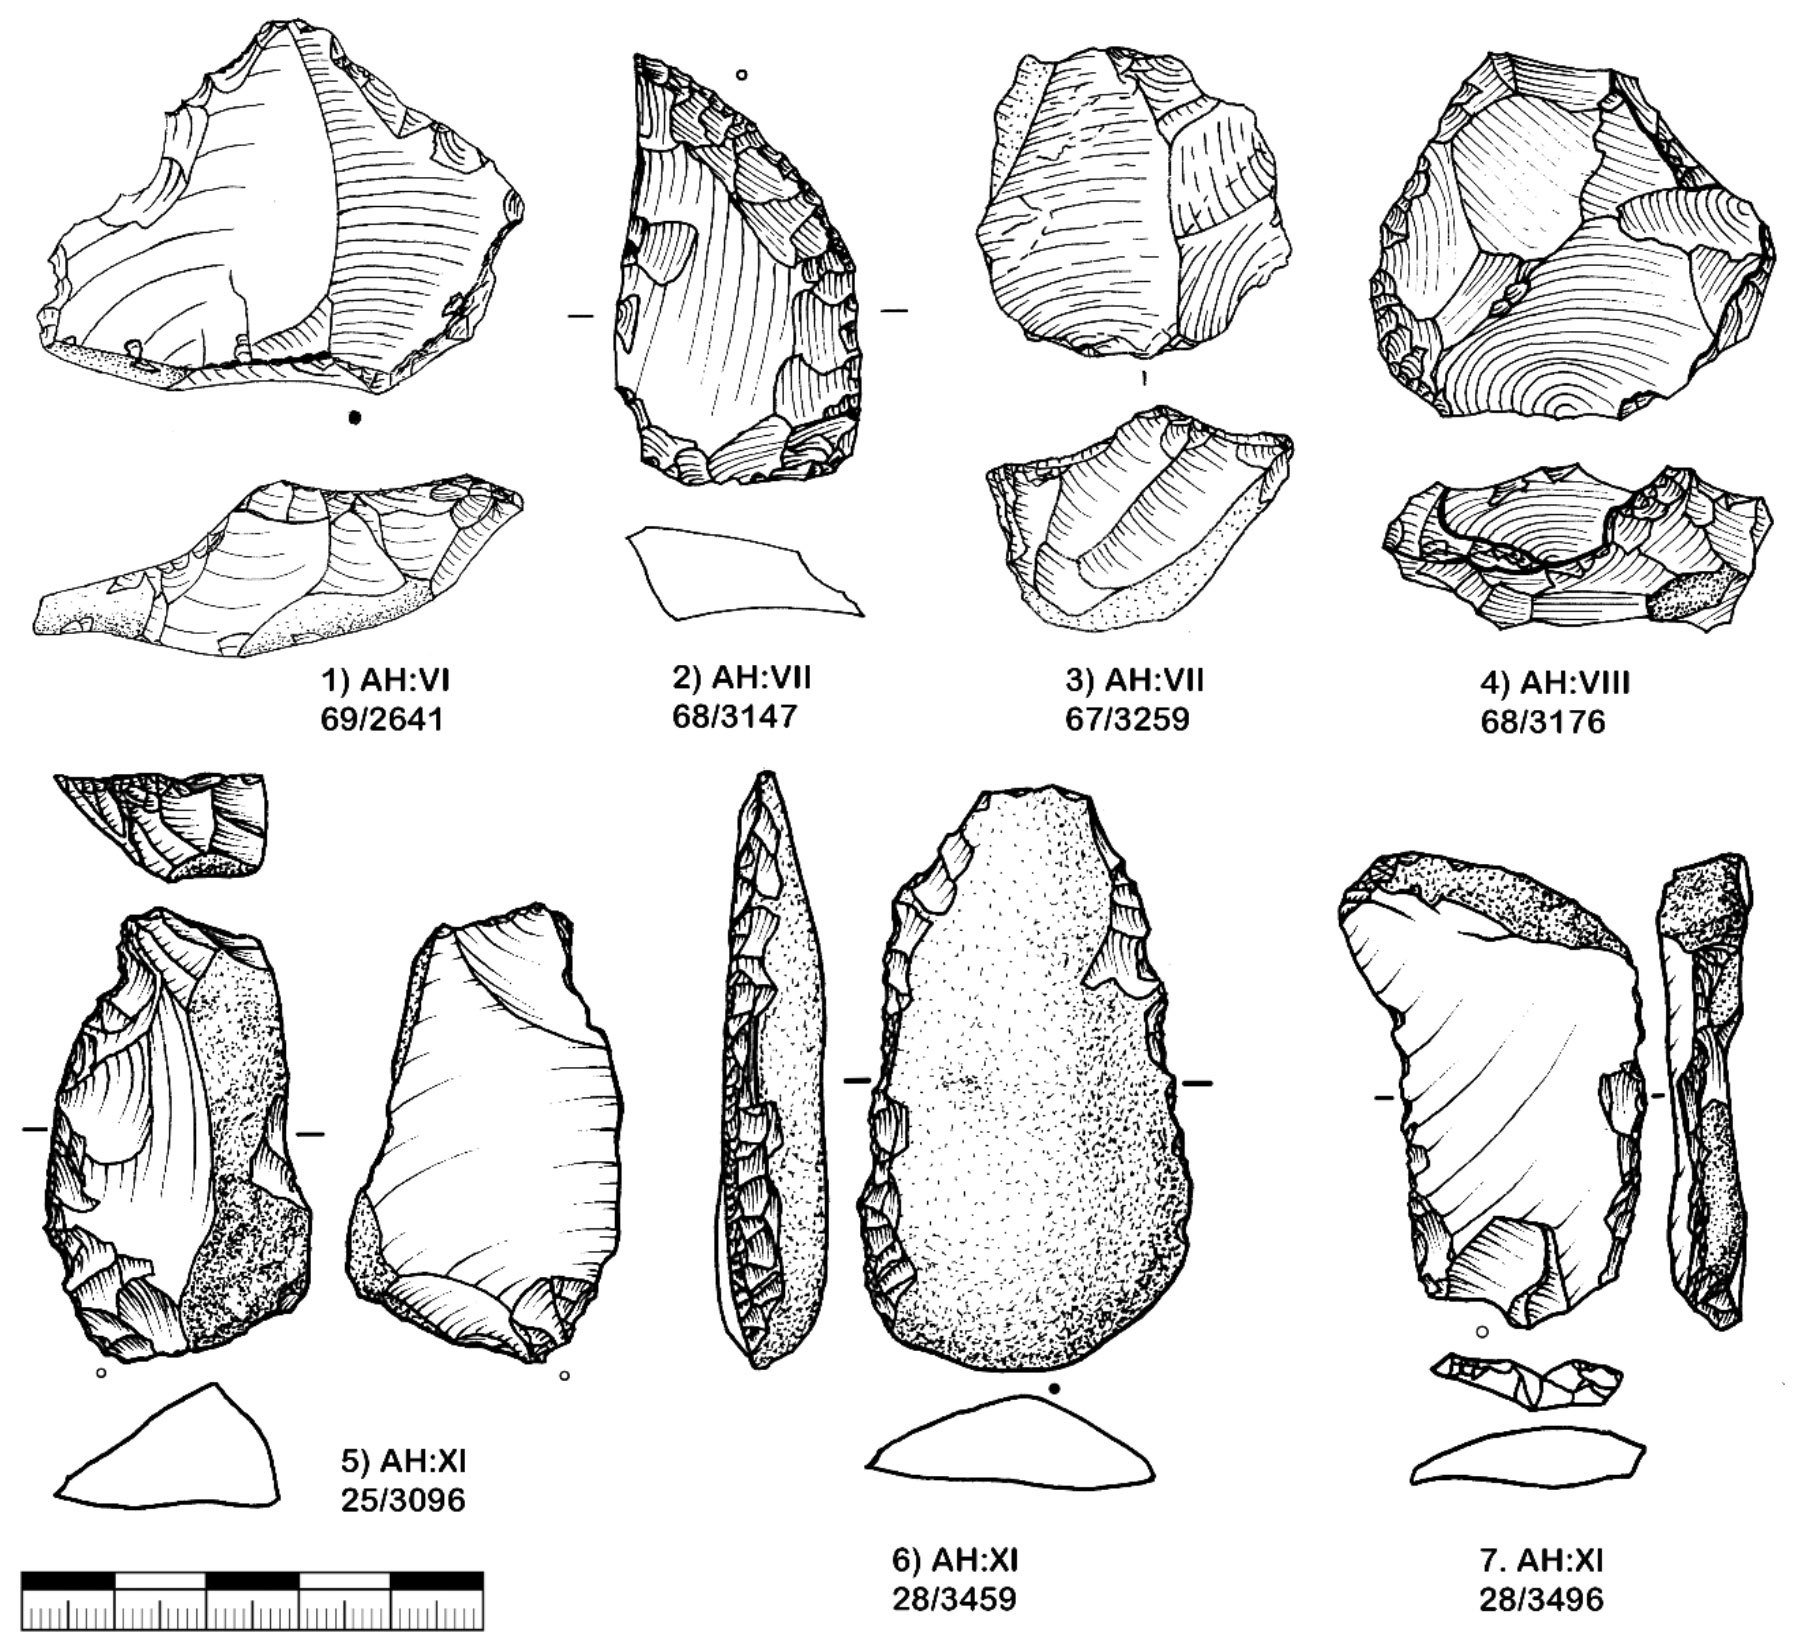 Hohle Fels, drawings of Middle Paleolithic stone artifacts from horizon VI-IX and XI